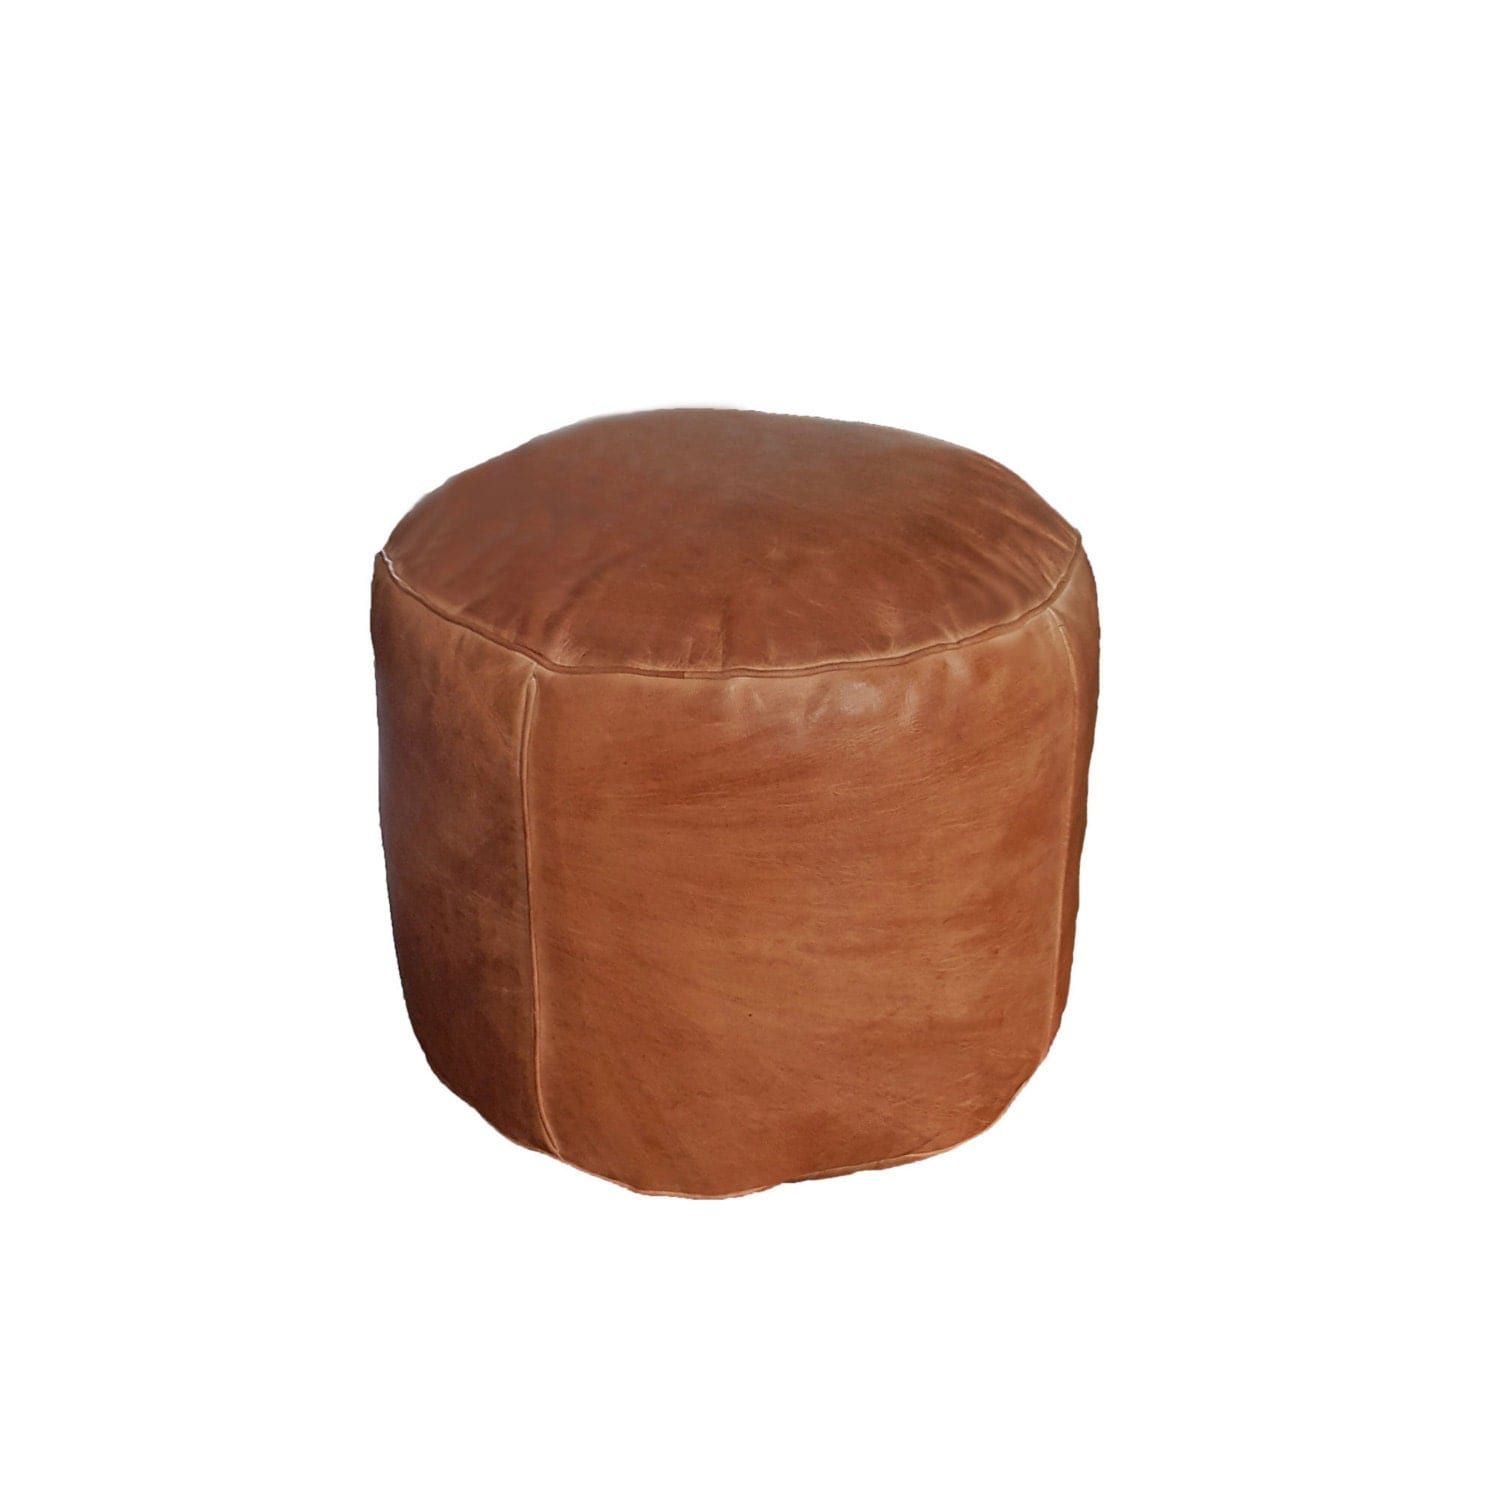 Round Leather Pouf Ottoman Natural Brown Leather With Regard To Brown Leather Tan Canvas Pouf Ottomans (View 4 of 20)